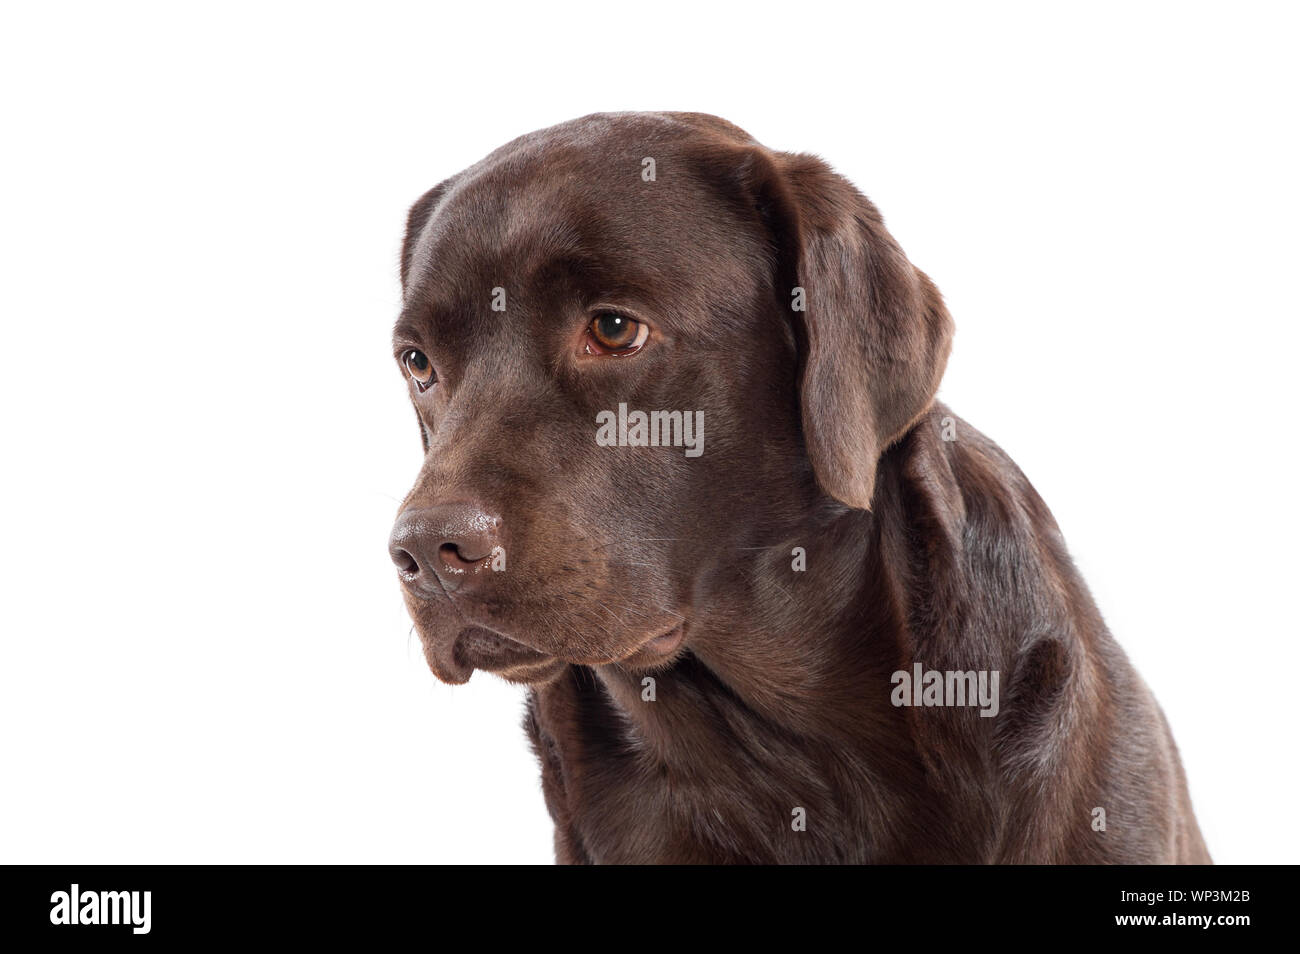 Close up headshot of a chocolate brown Labrador retriever puppy looking to the side with a calm expression isolated on white Stock Photo